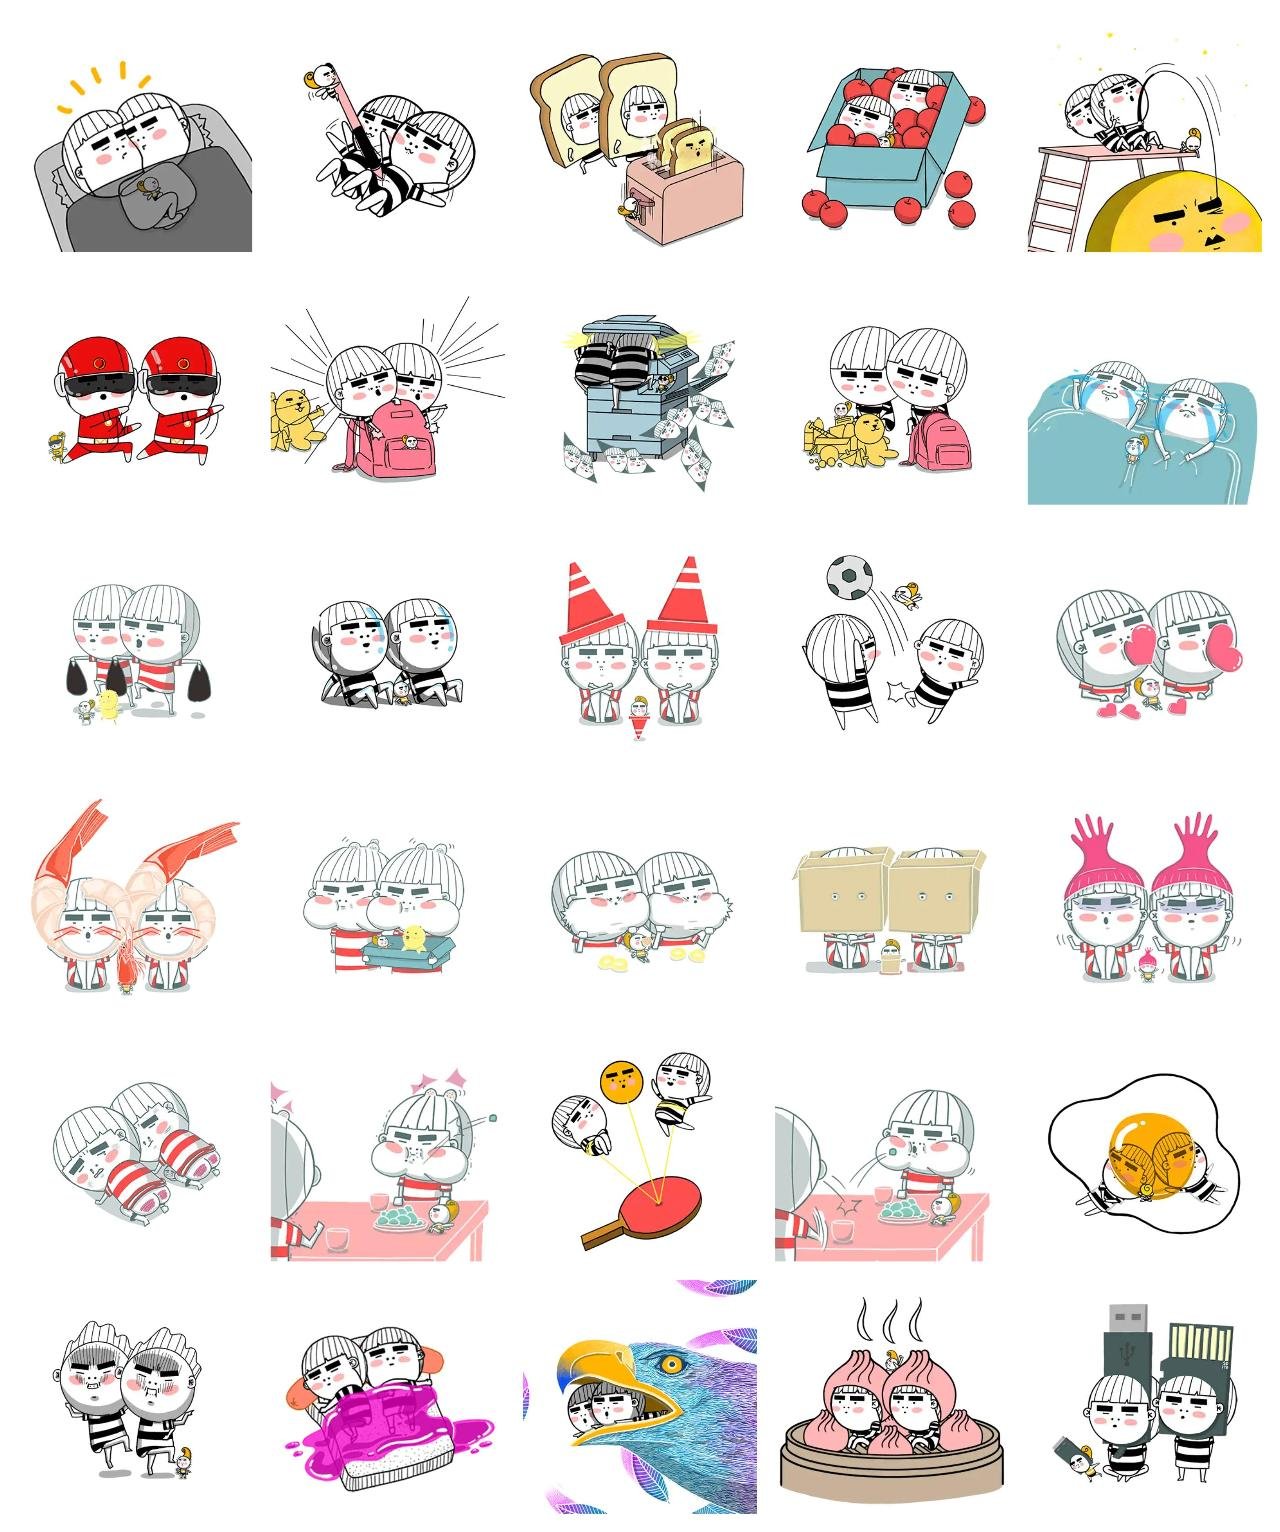 Olaoo 5 Animation/Cartoon,Gag sticker pack for Whatsapp, Telegram, Signal, and others chatting and message apps